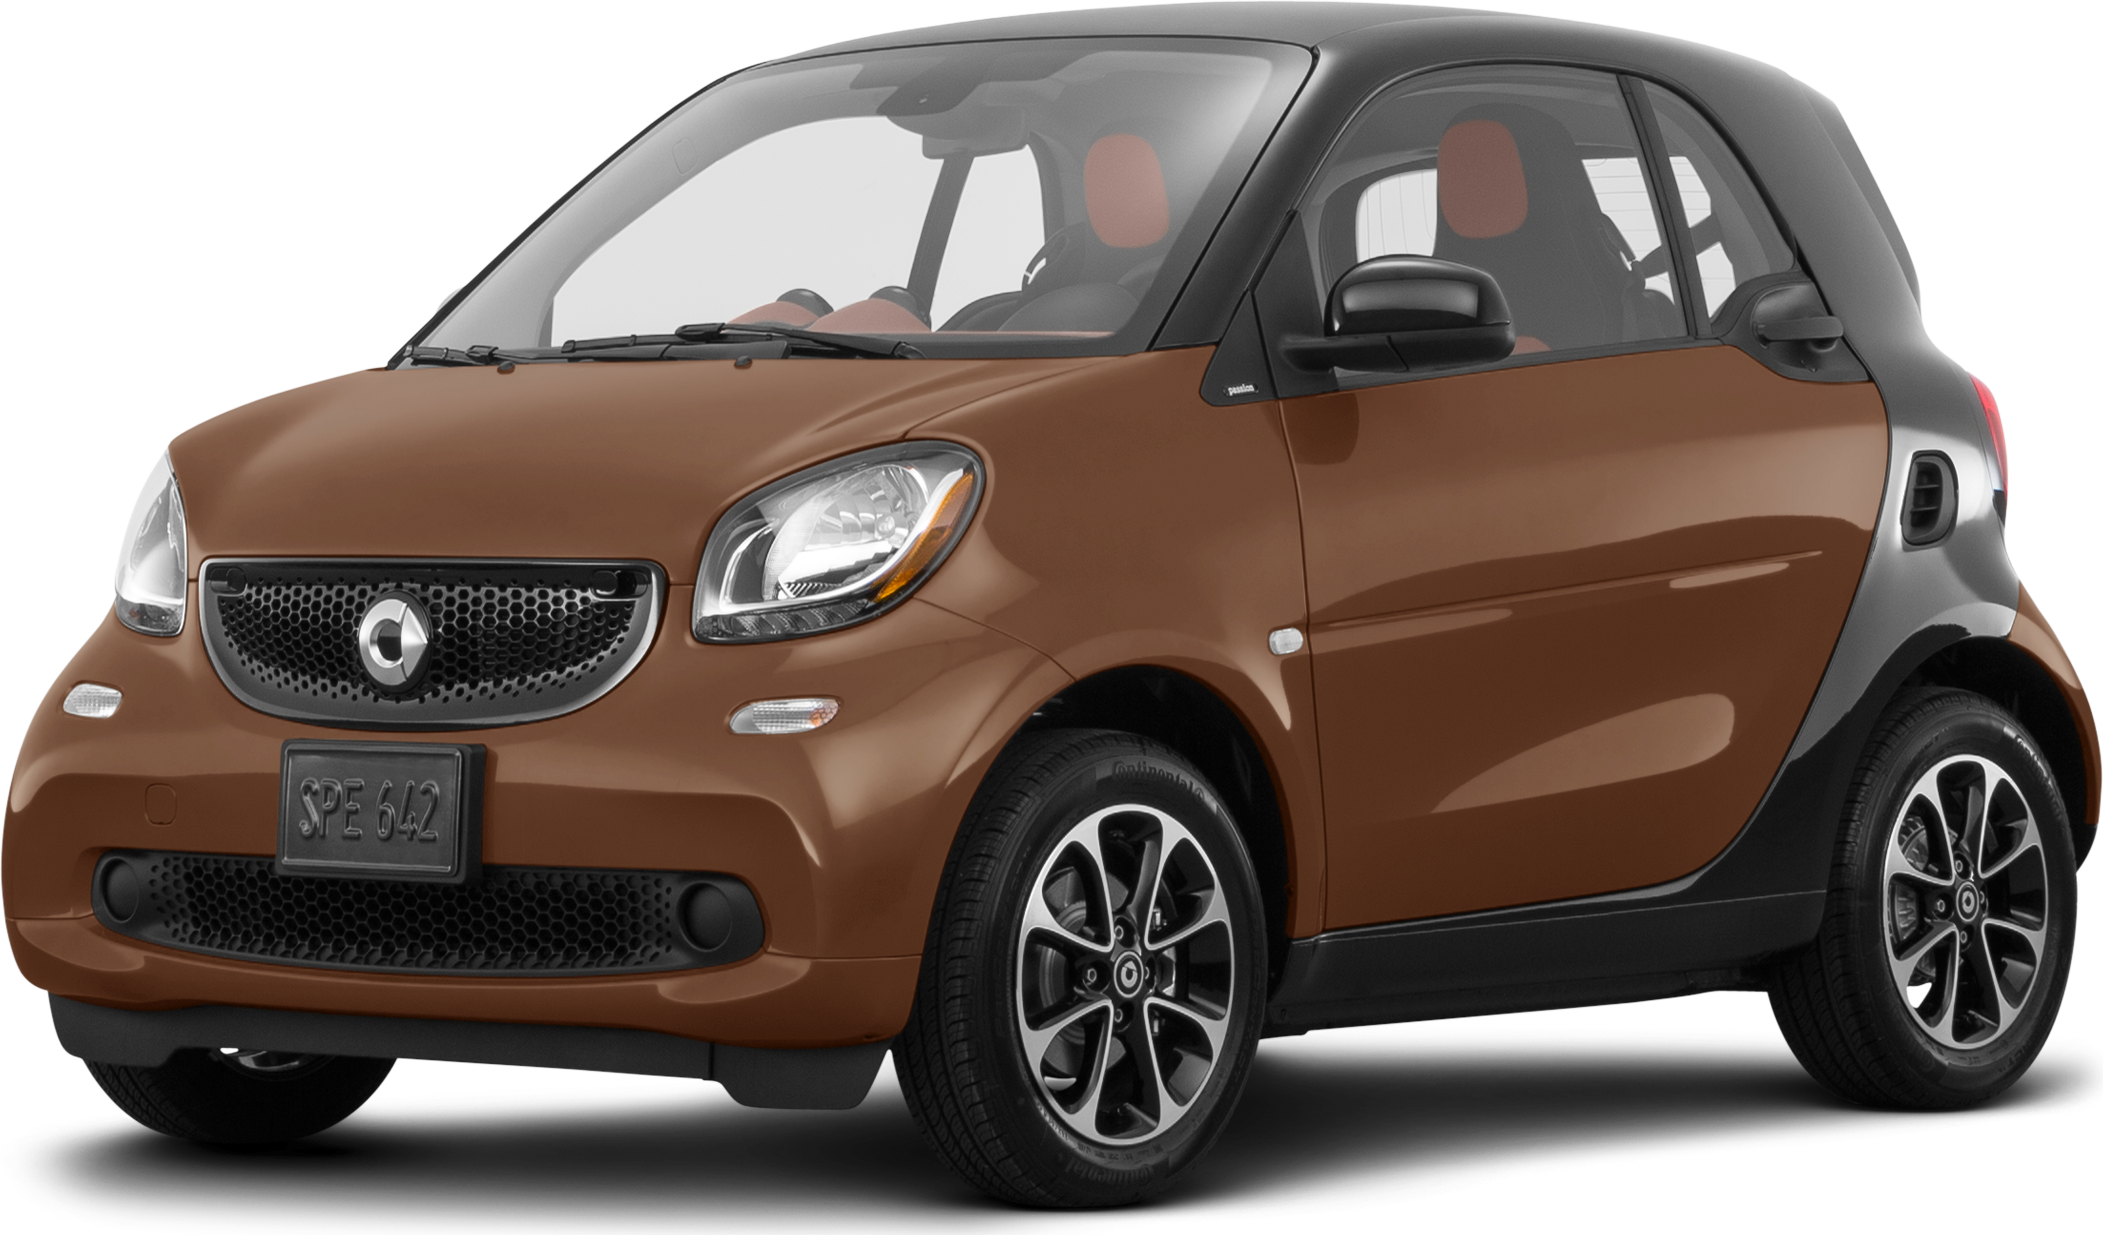 2012 smart fortwo Price, Value, Ratings & Reviews